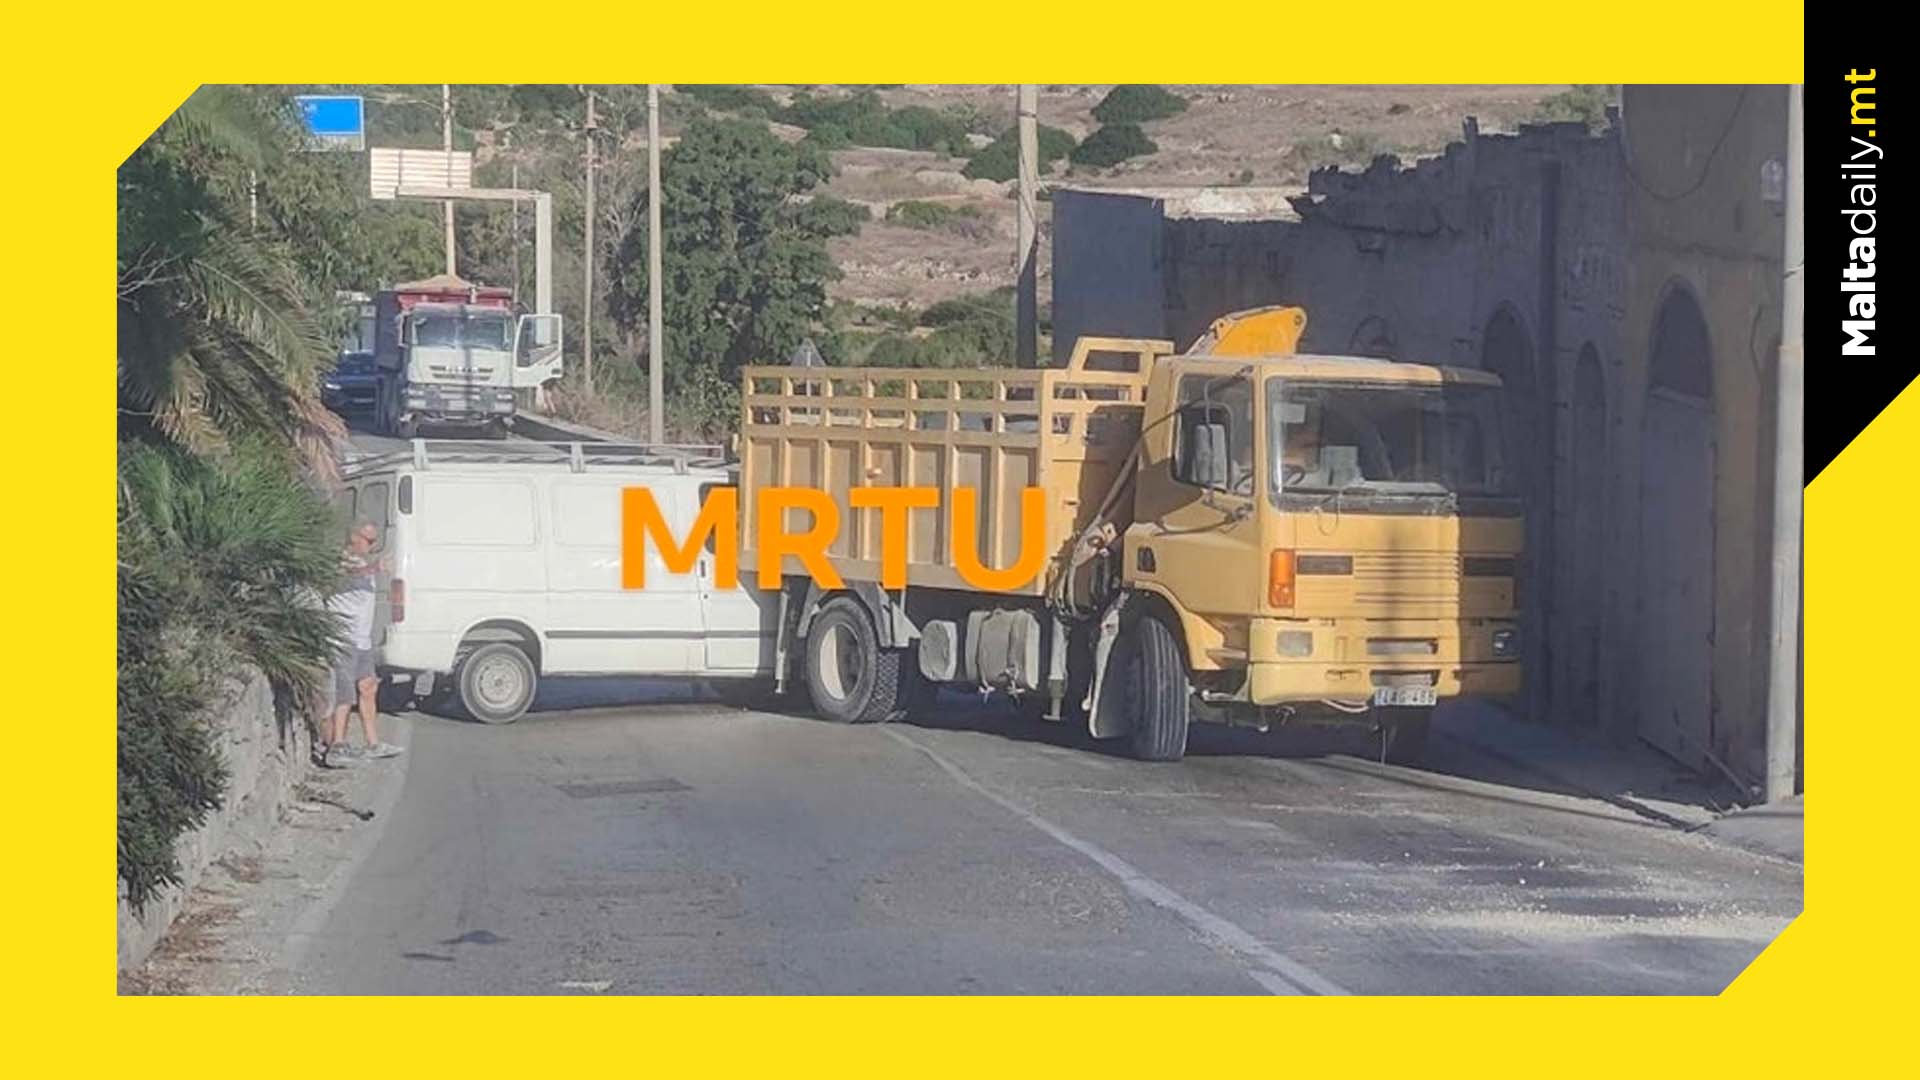 Mistra Hill Accident Site Cleared: Traffic Access Restored